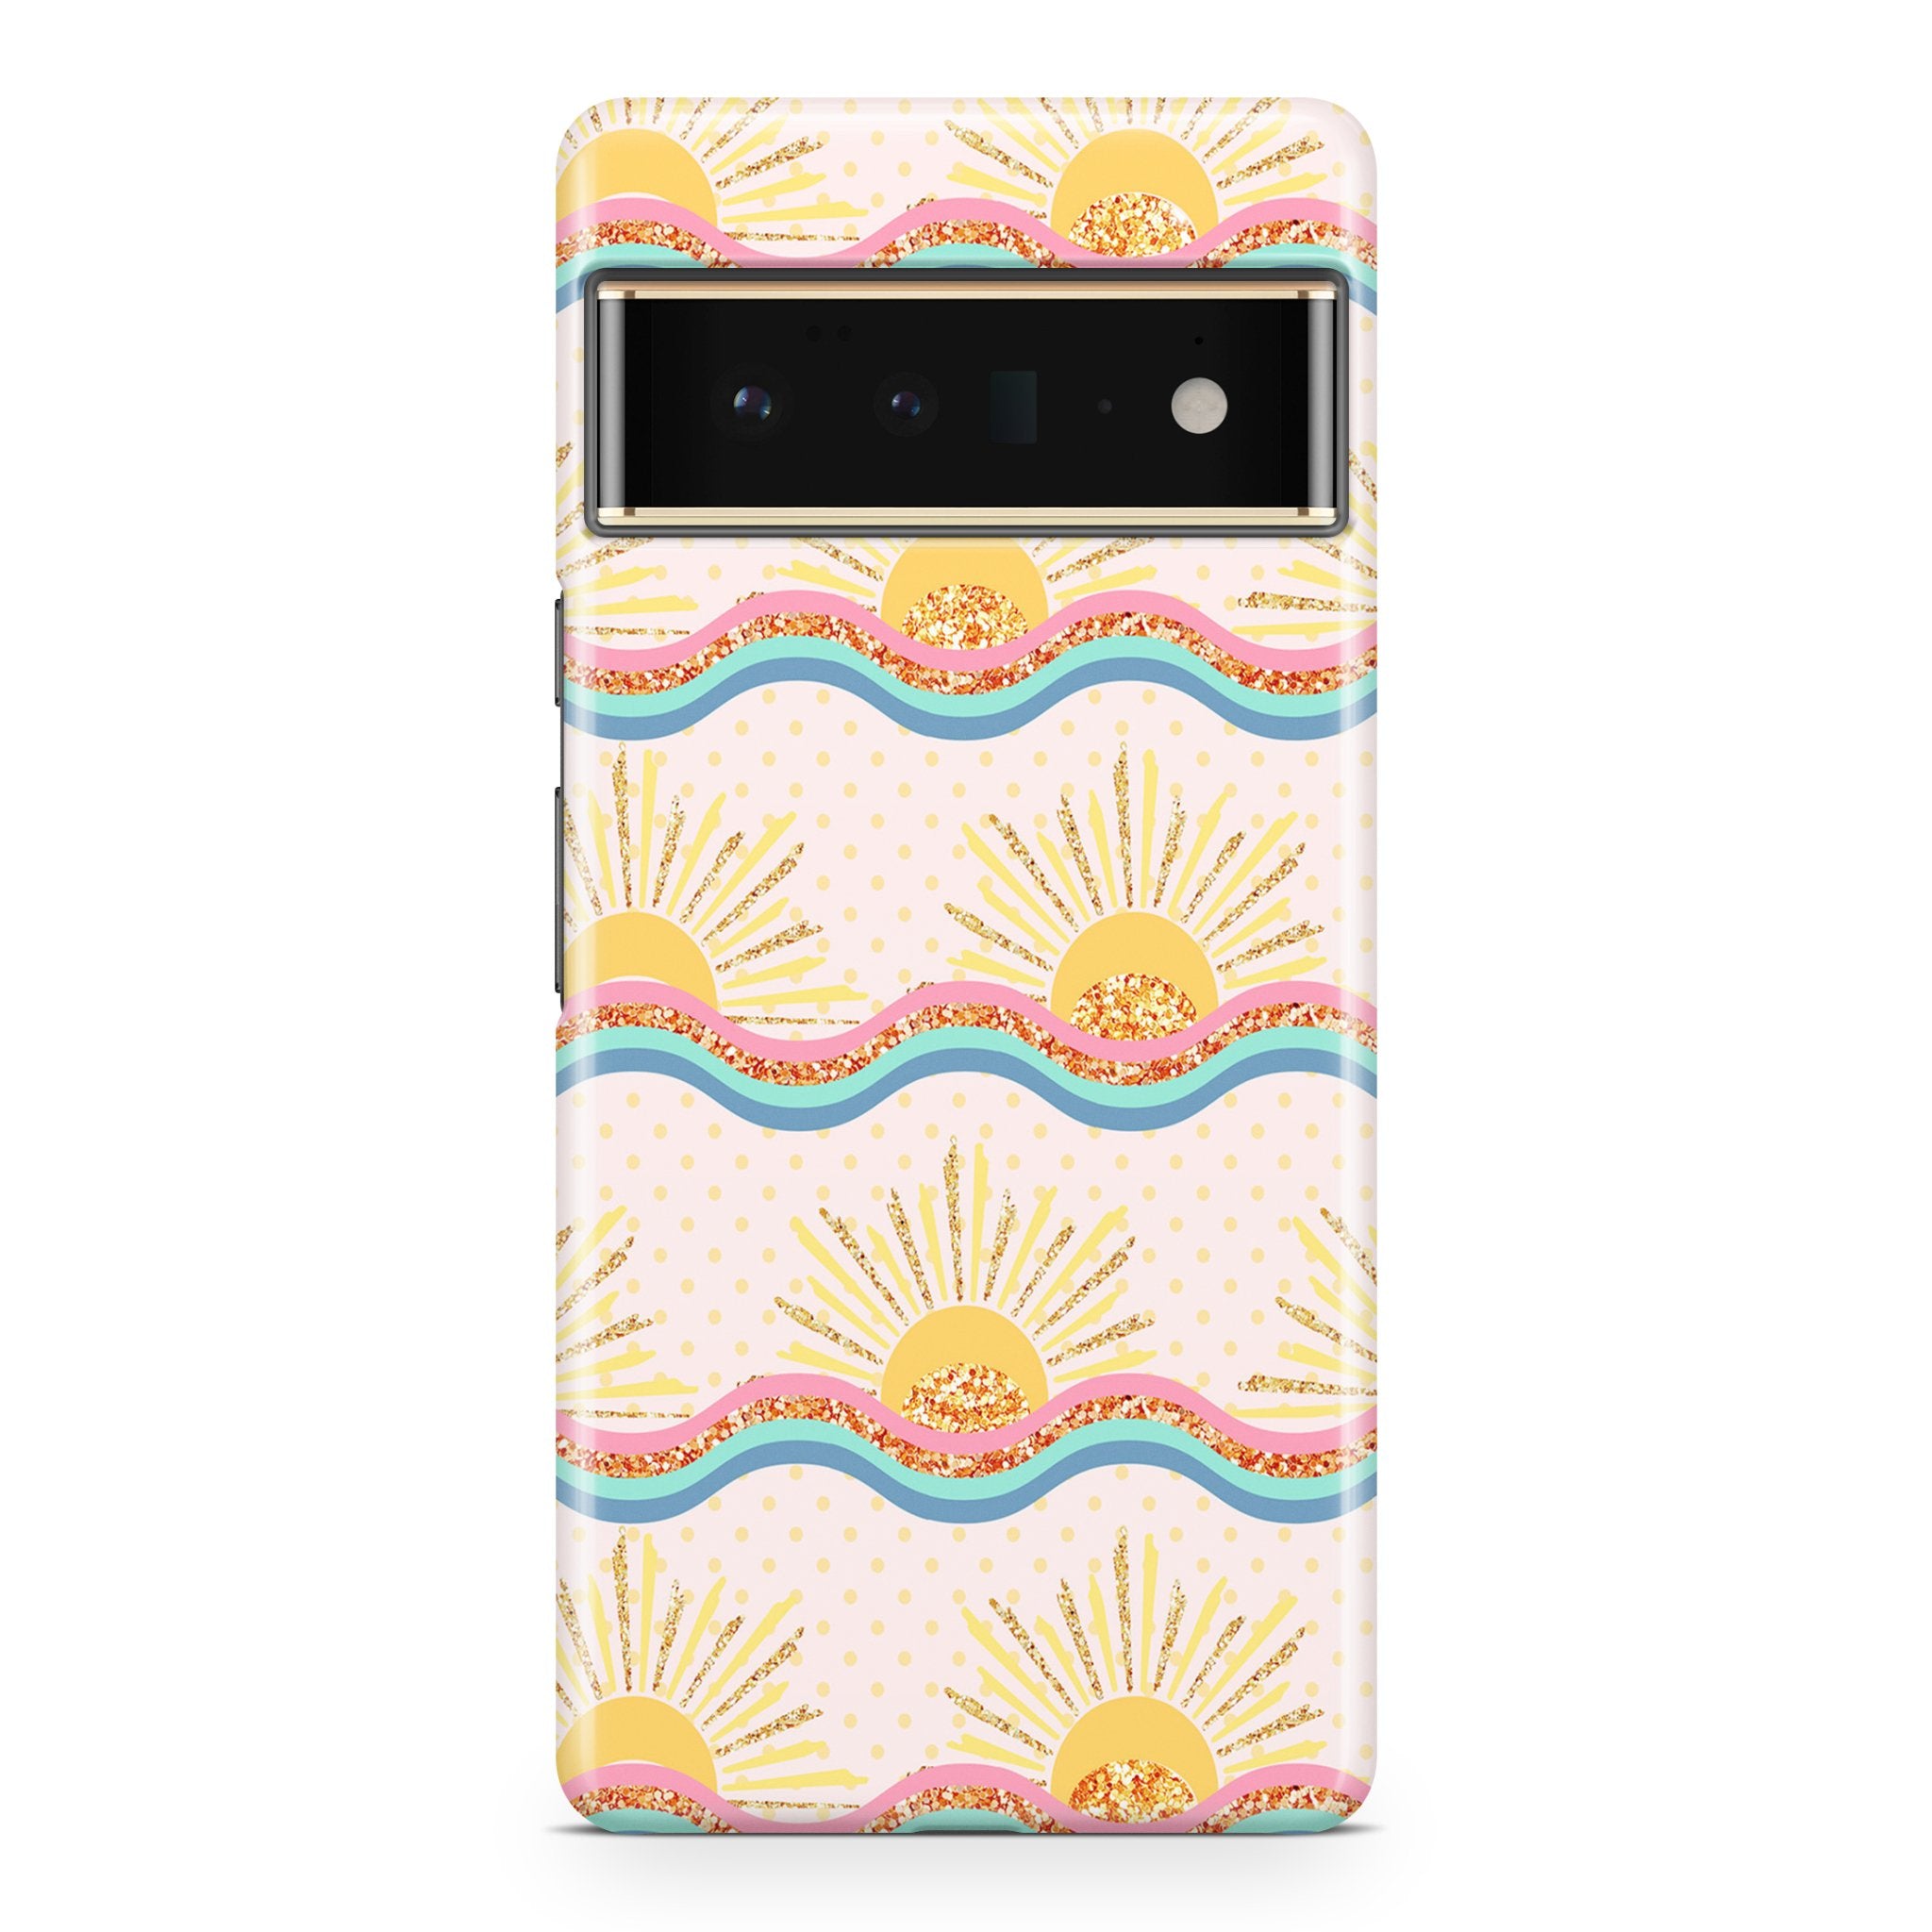 Happy Sun - Google phone case designs by CaseSwagger